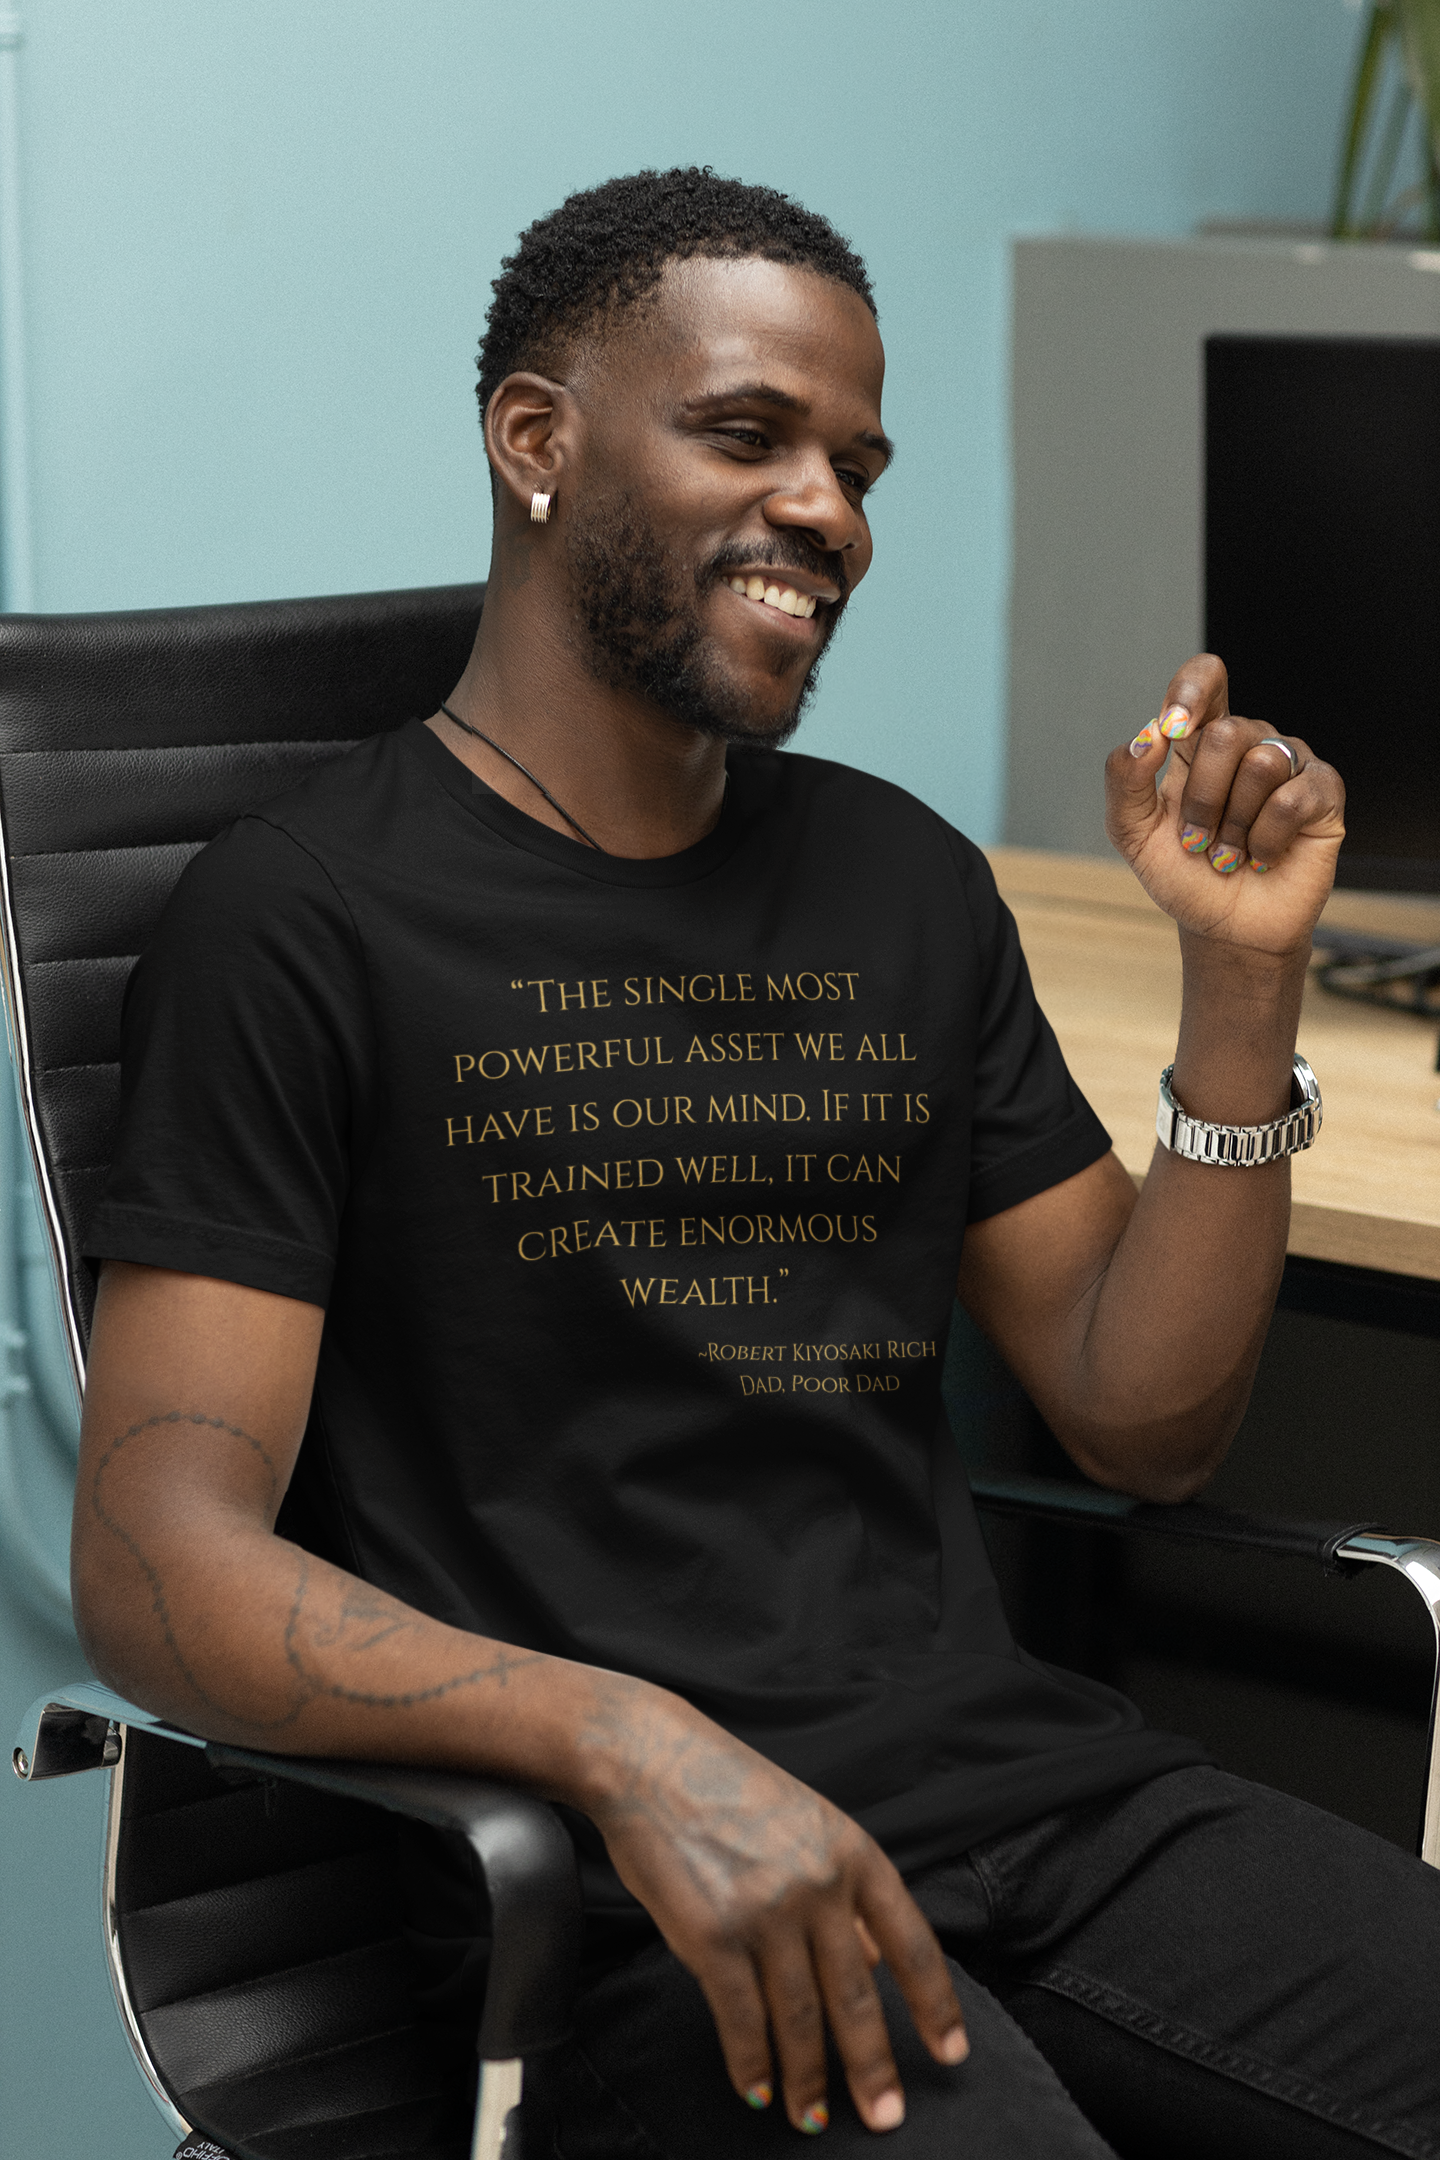 "The single most powerful asset we all have is our mind. If it is trained well, it can create enormous wealth." ~Robert Kiyosaki Rich Dad, Poor Dad ~ Super-comfortable, Unisex Short Sleeve T shirt With Add-A-Tude